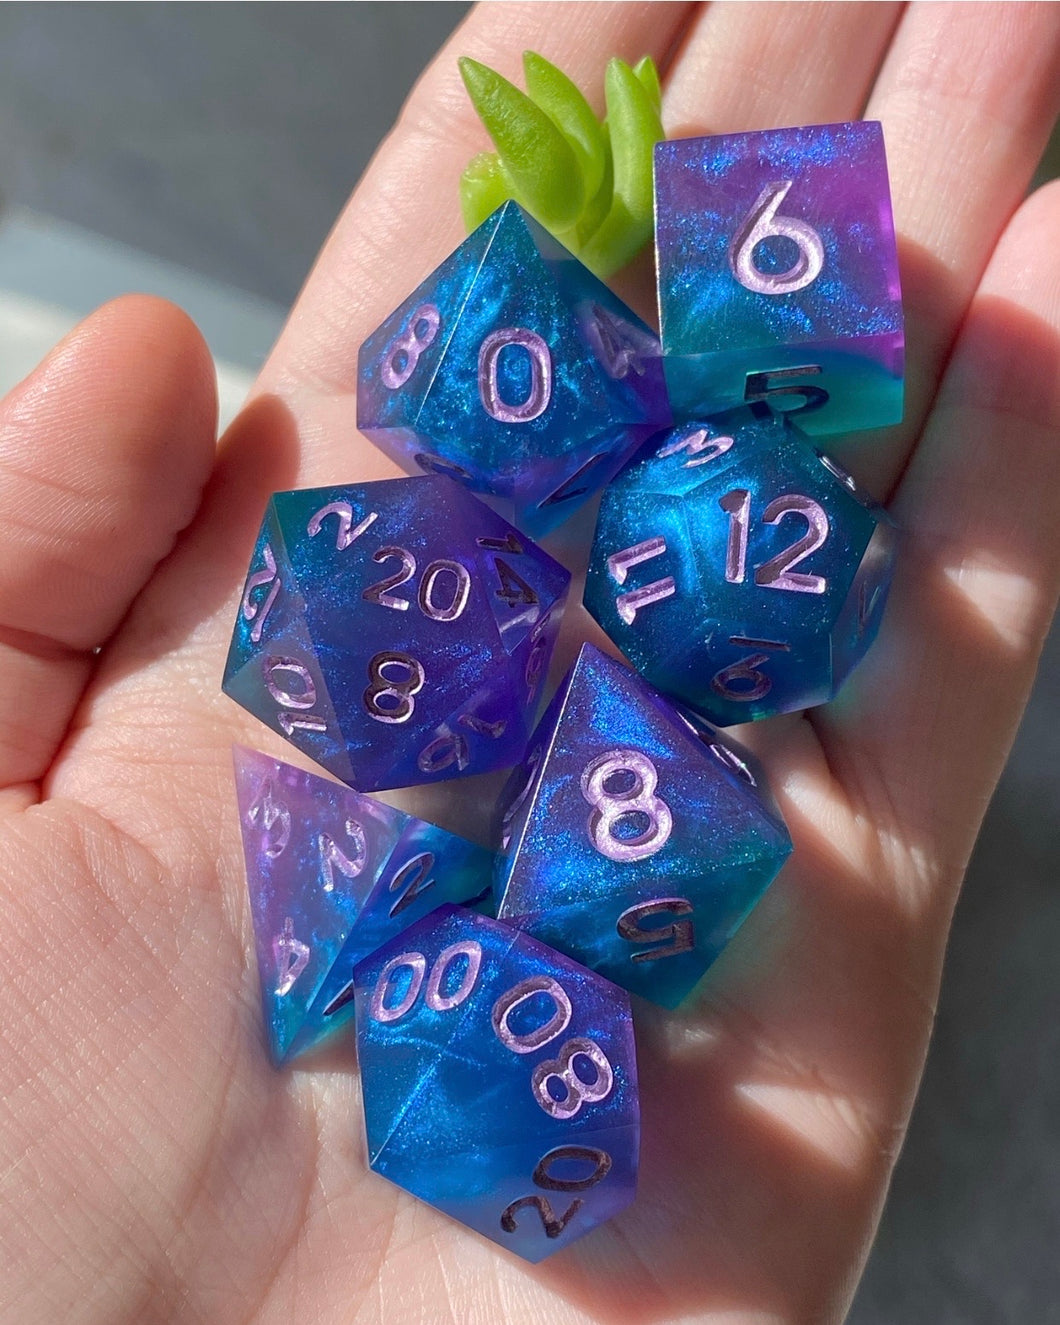 Astral Projection 7-Piece Dice Set - Blue Colorway